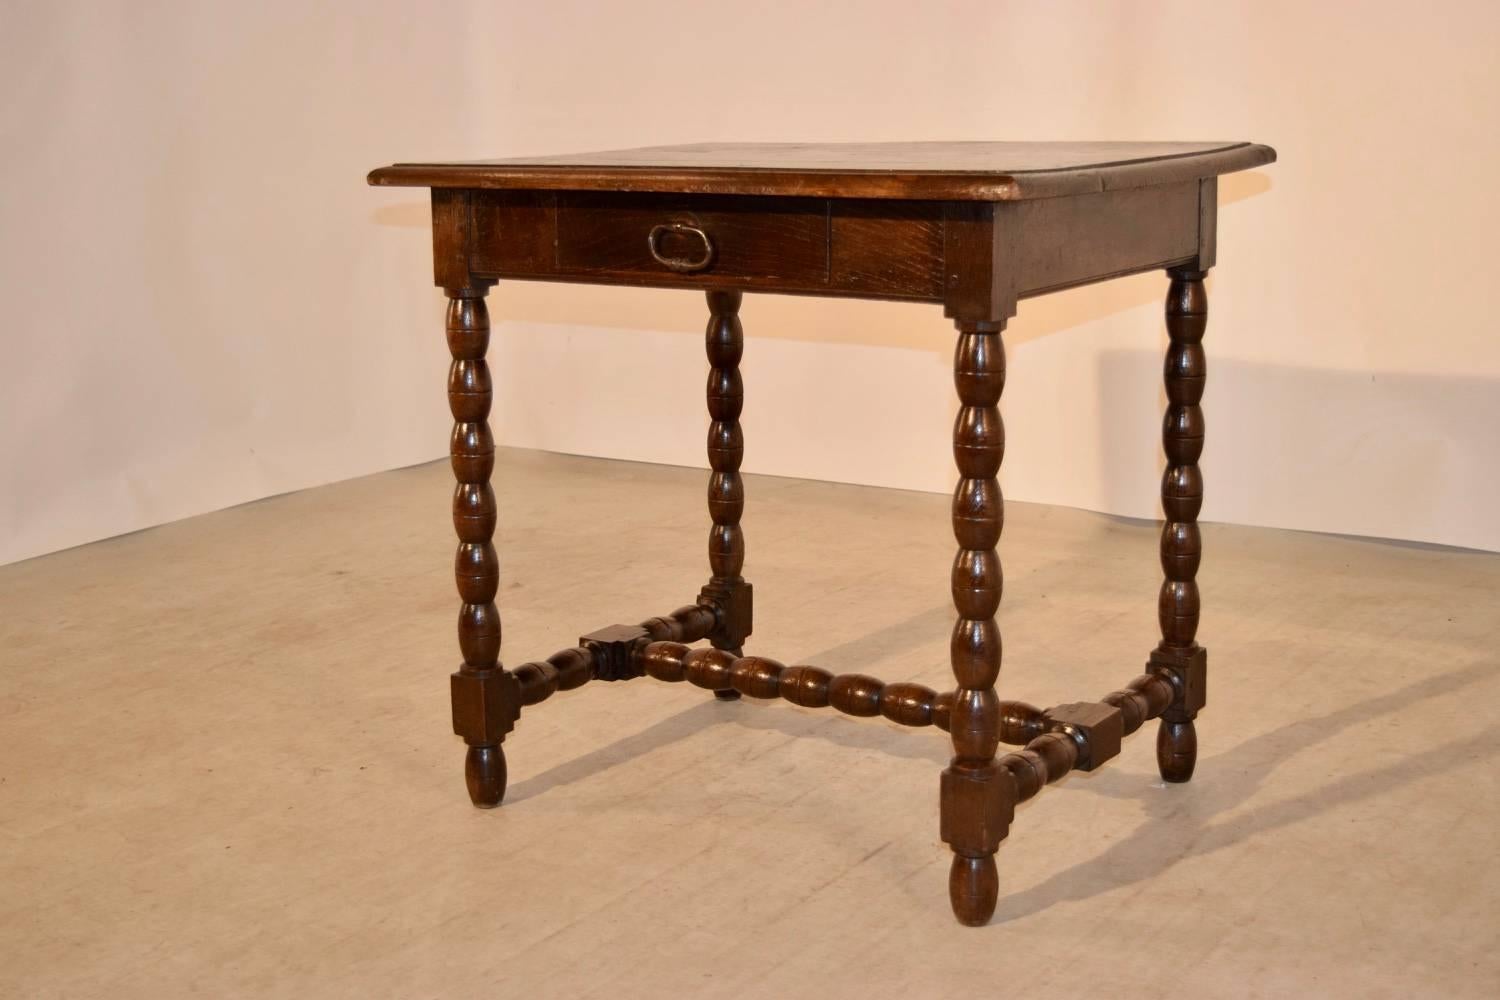 18th century English elm side table with a nicely beveled edge around top following down to a simple apron containing a single drawer and bobbin legs joined by matching stretchers. Raised on turned feet.